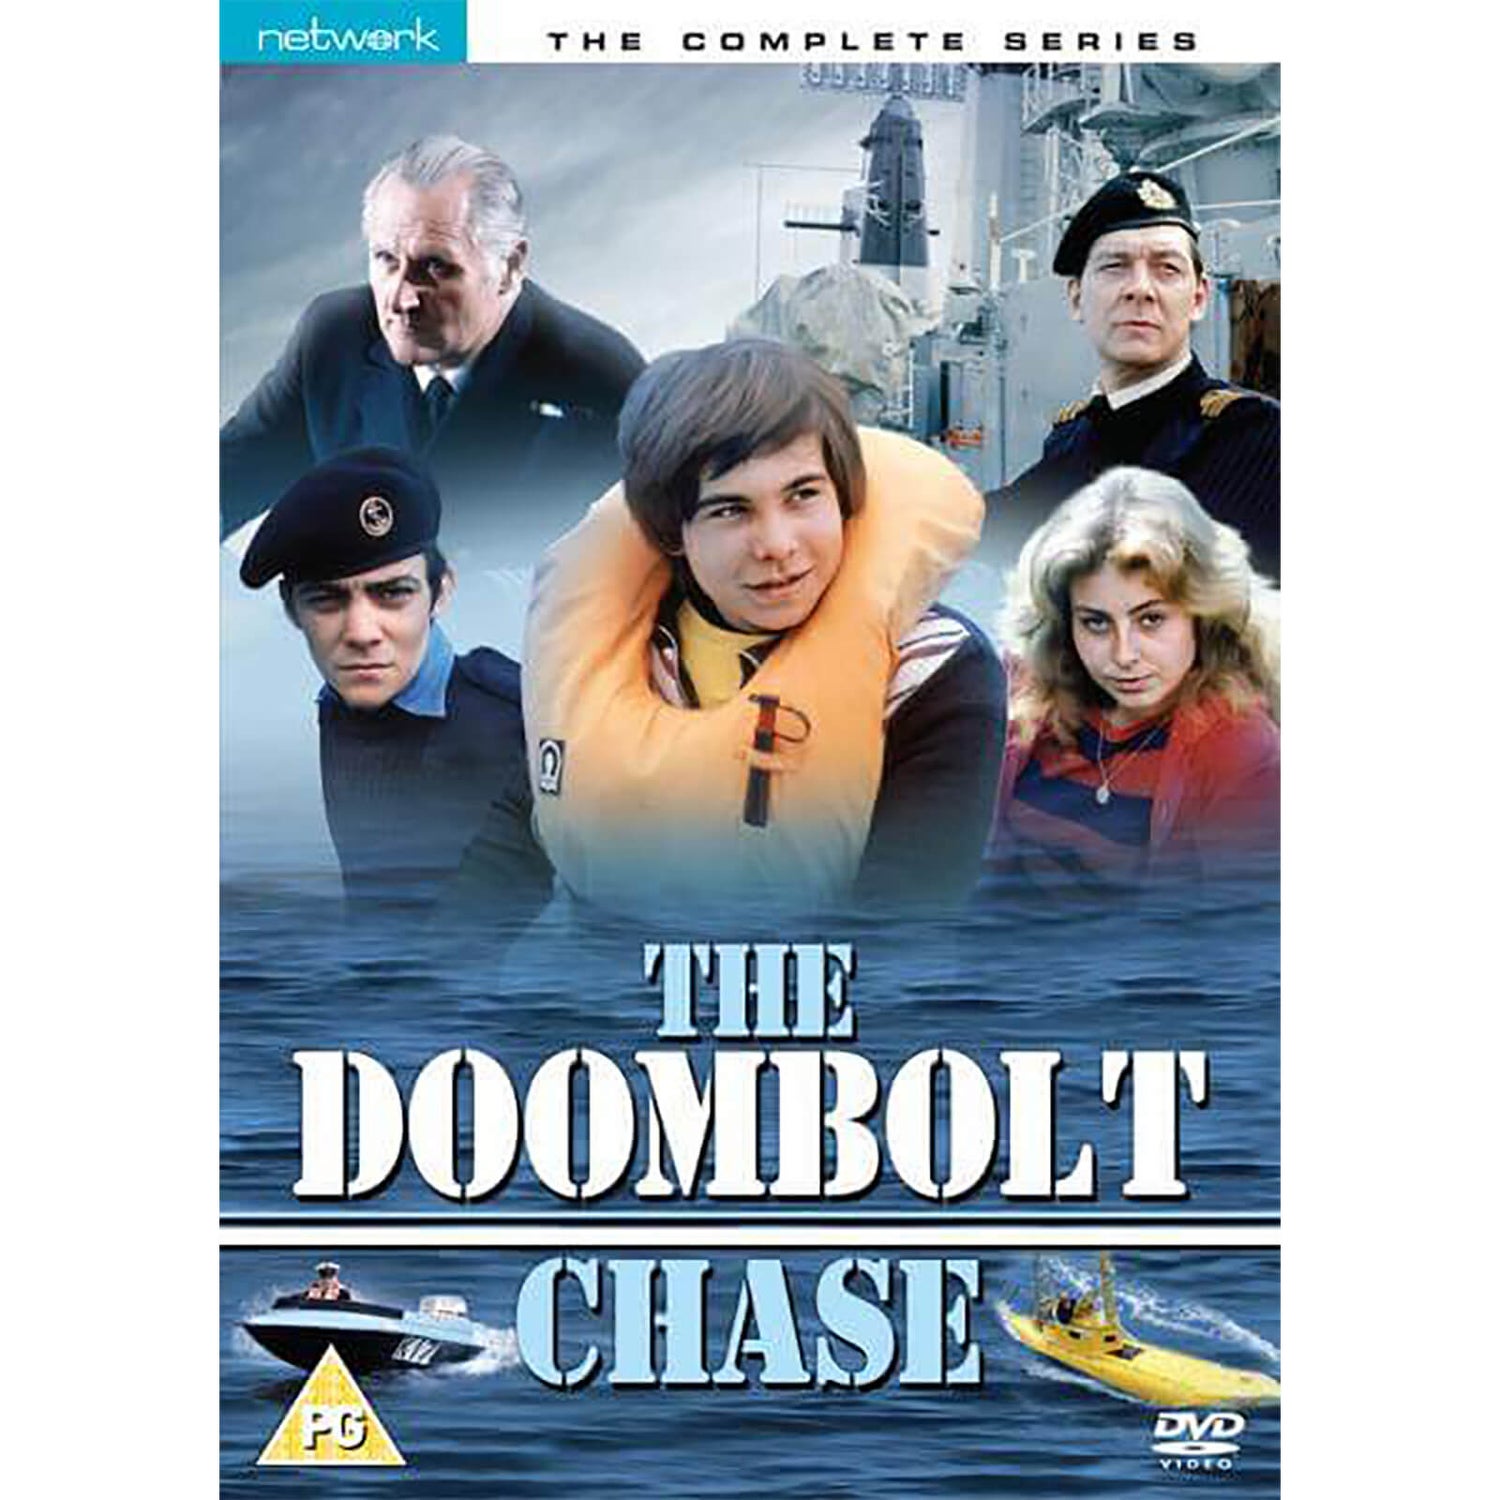 Doombolt Chase - The Complete Series